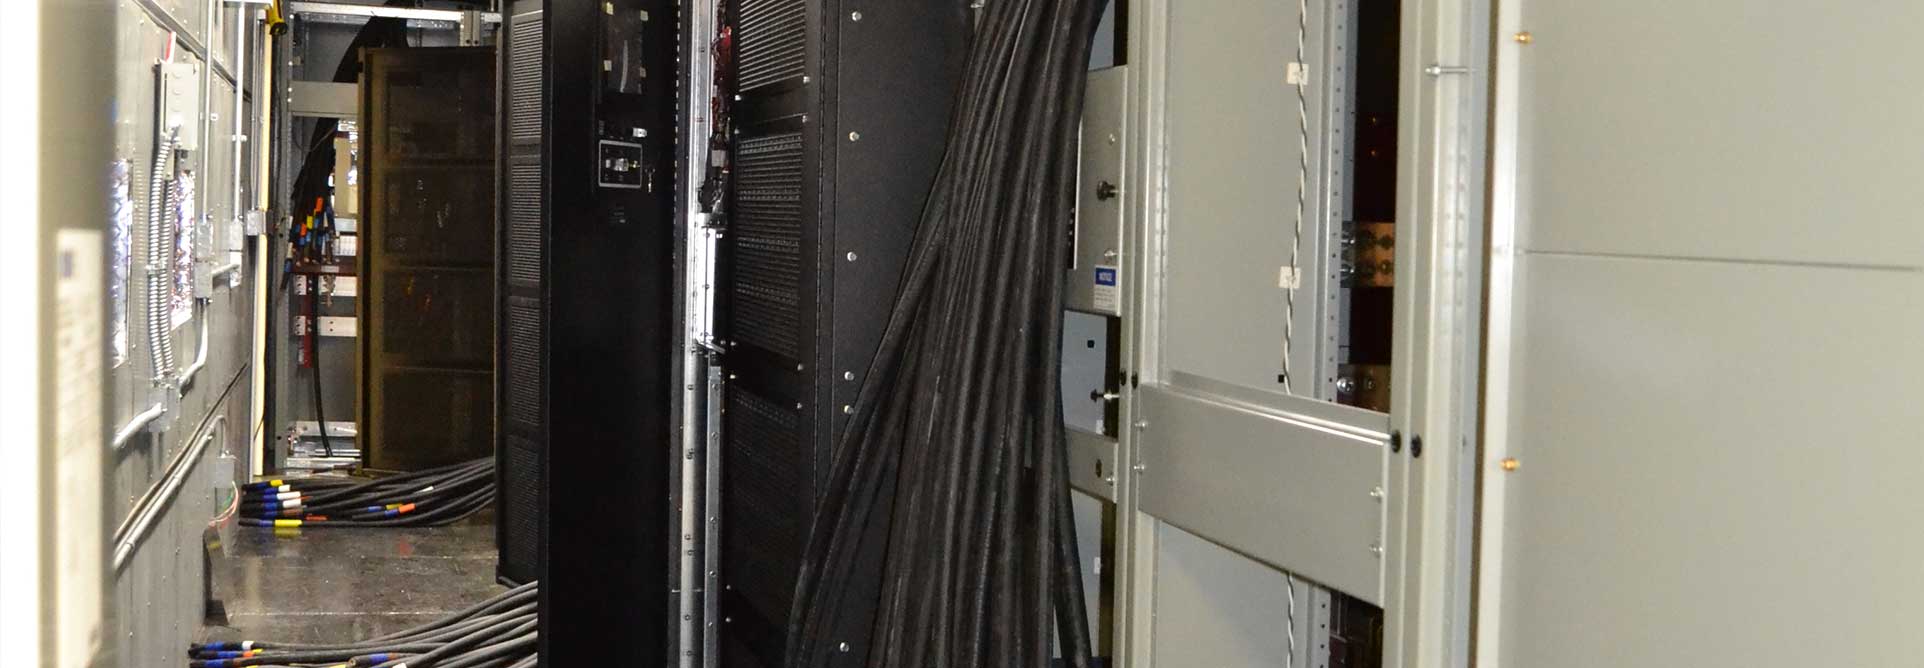 modular_equipment_shelters_for_ups_systems_cabling_case_study